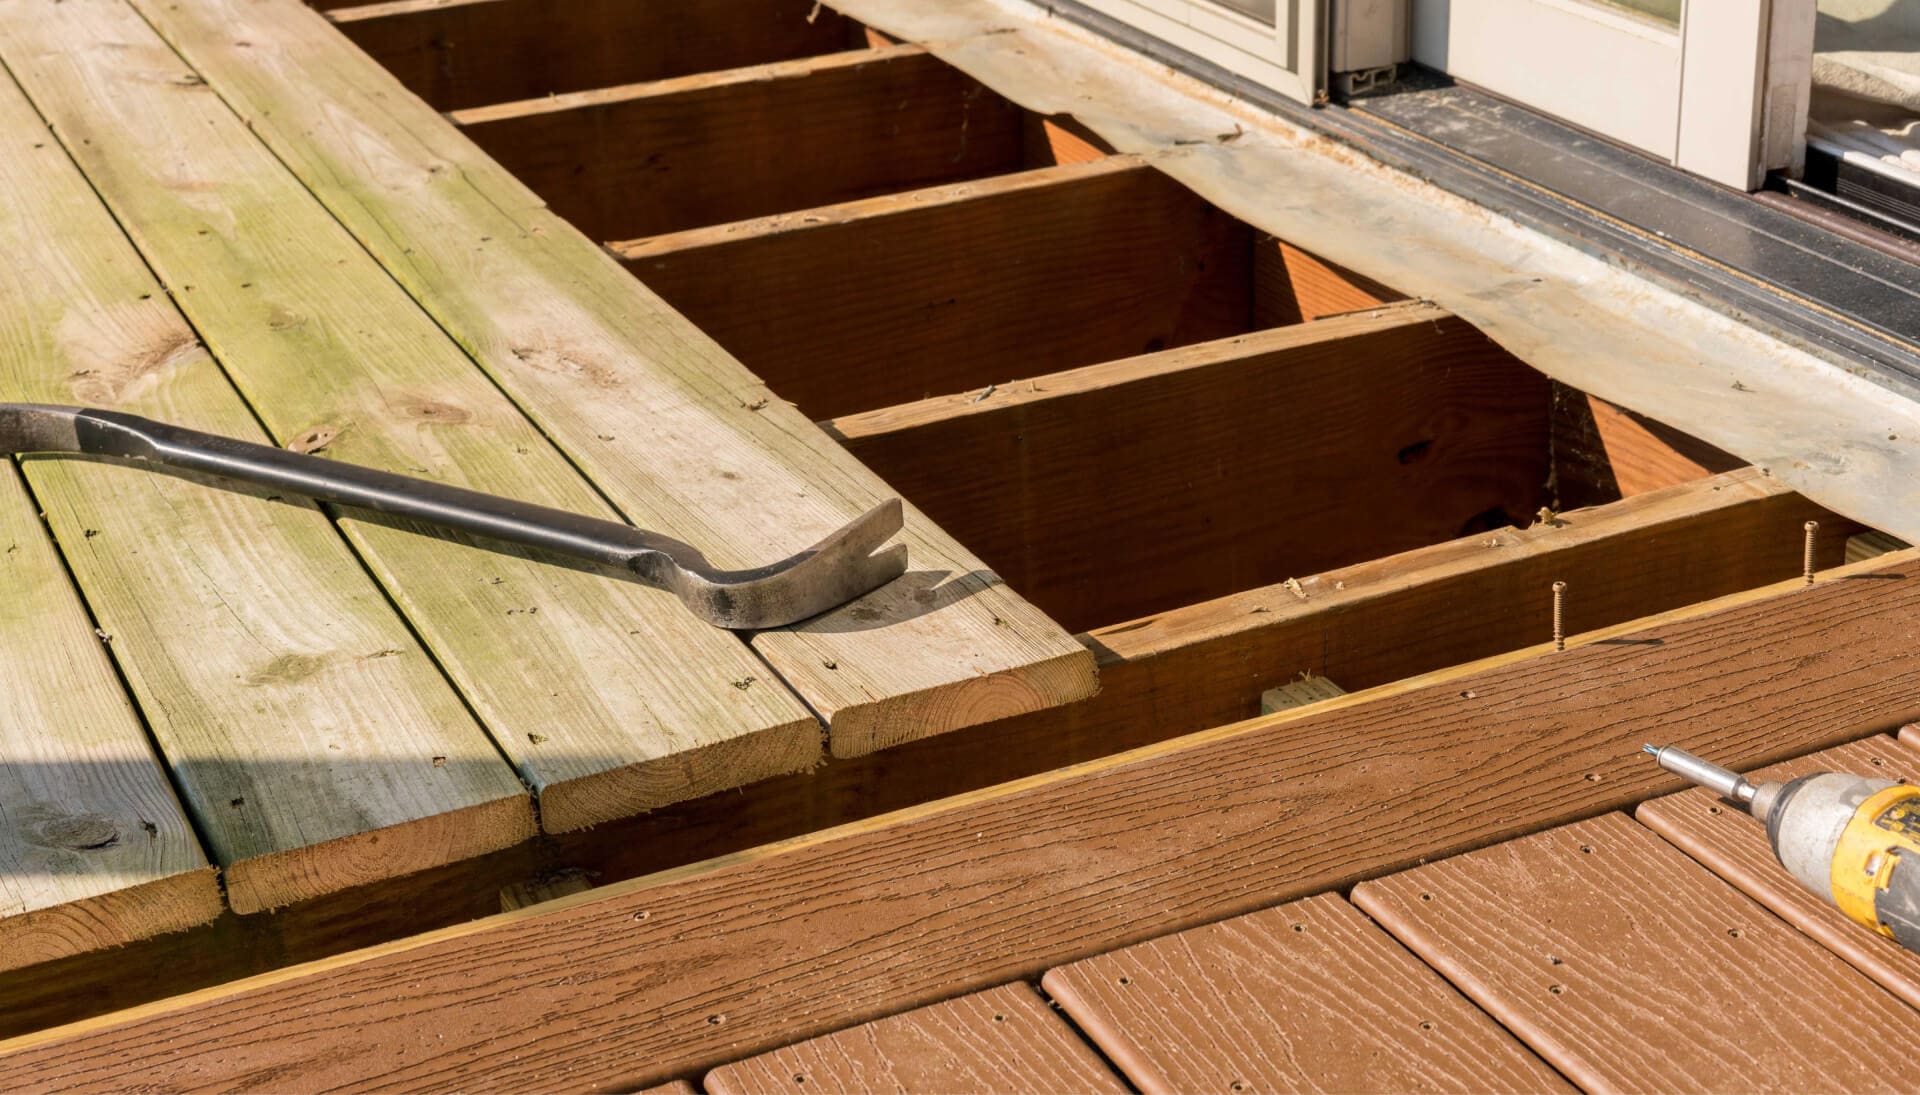 A professional deck repair service in Northeast Ohio, providing thorough inspections and maintenance to ensure the safety and durability of the structure